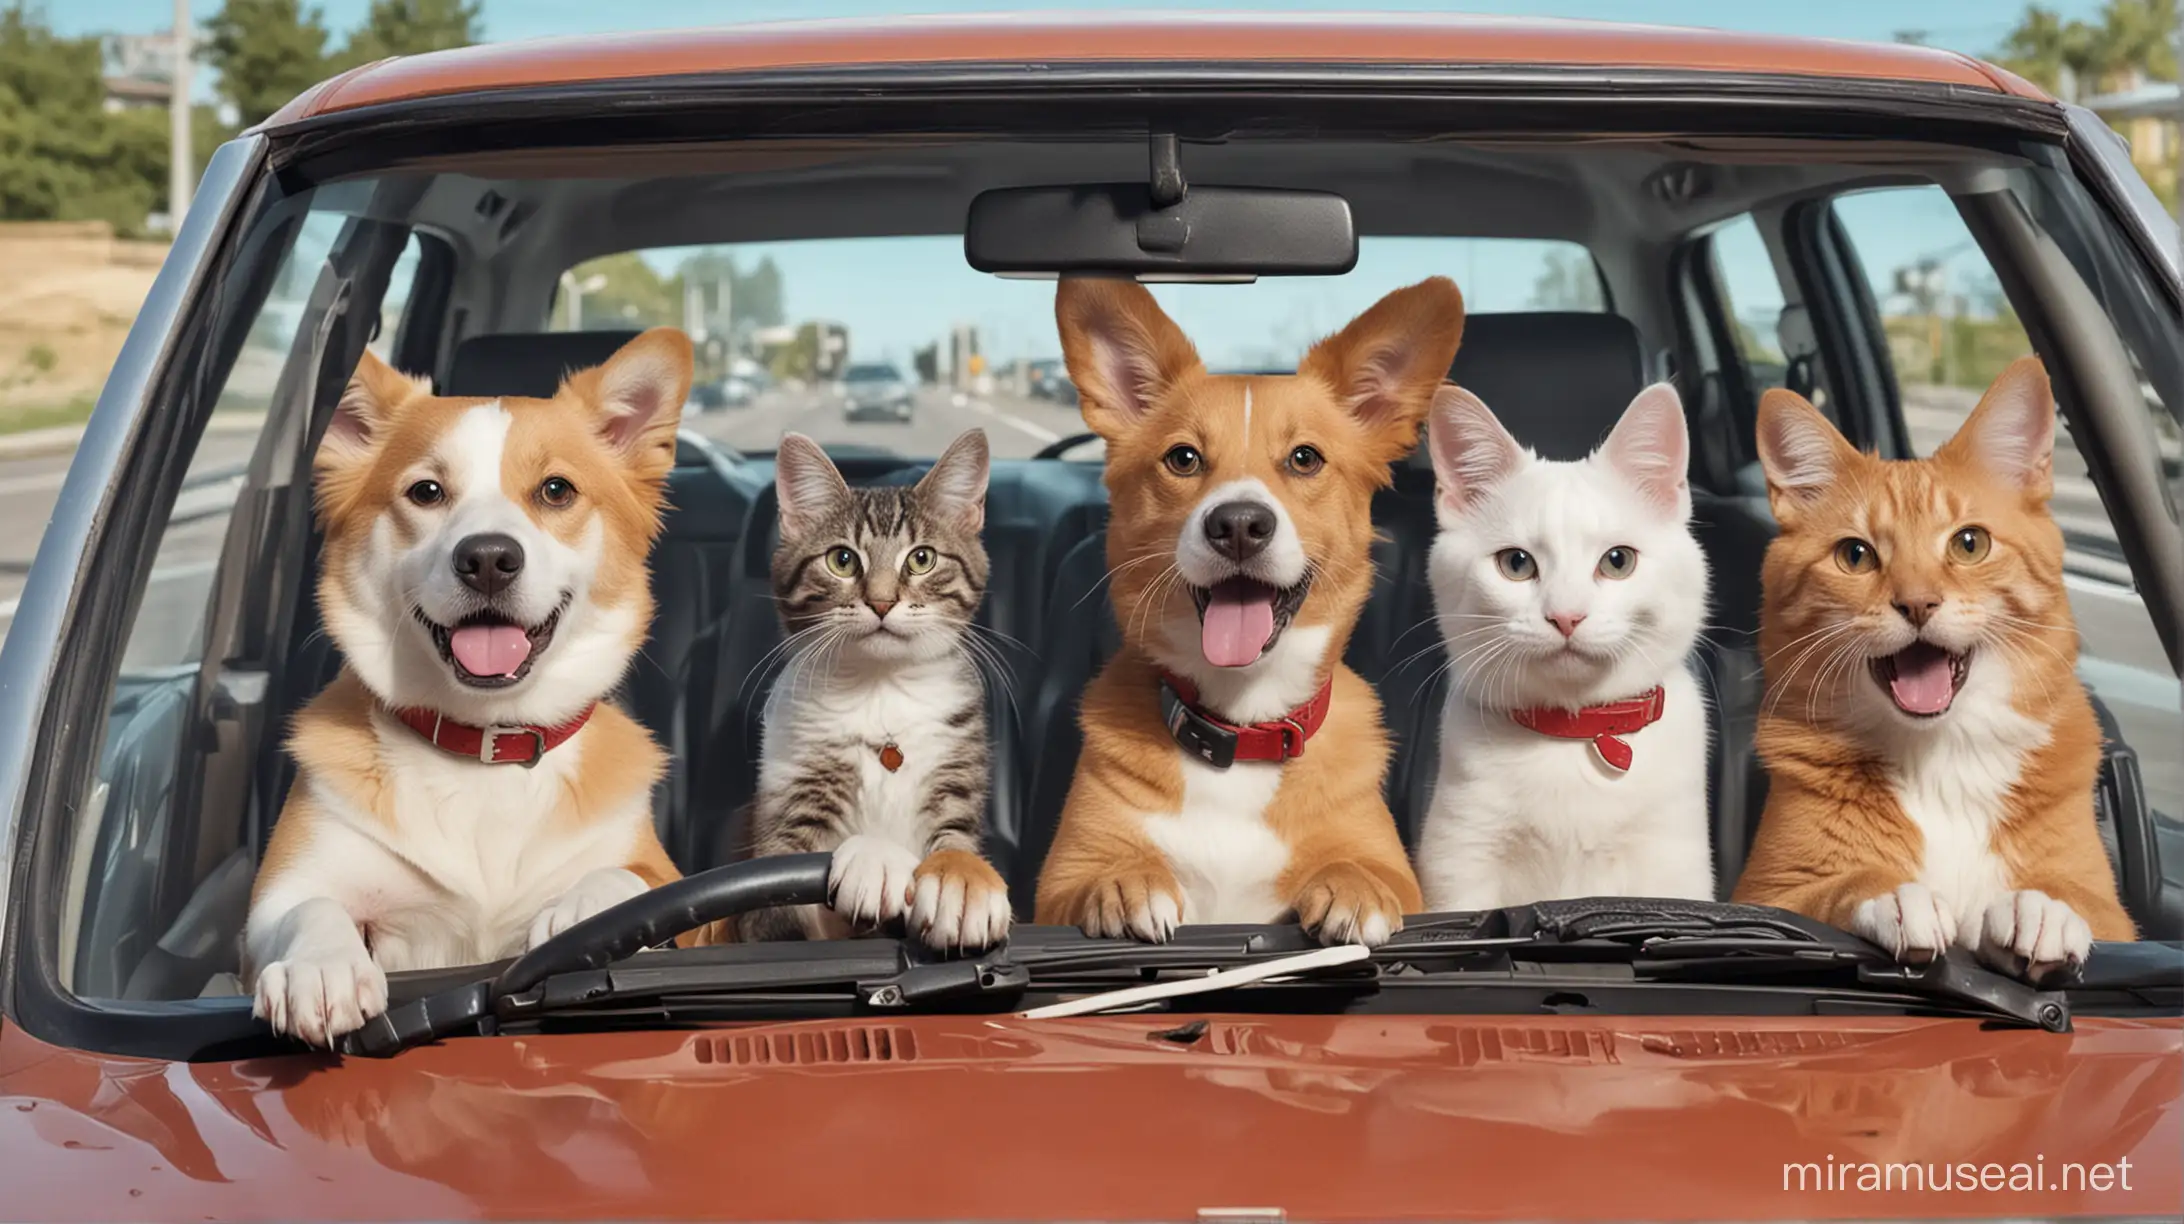 Pets Driving Cars Dogs and Cats Take the Wheel in a Whimsical Journey